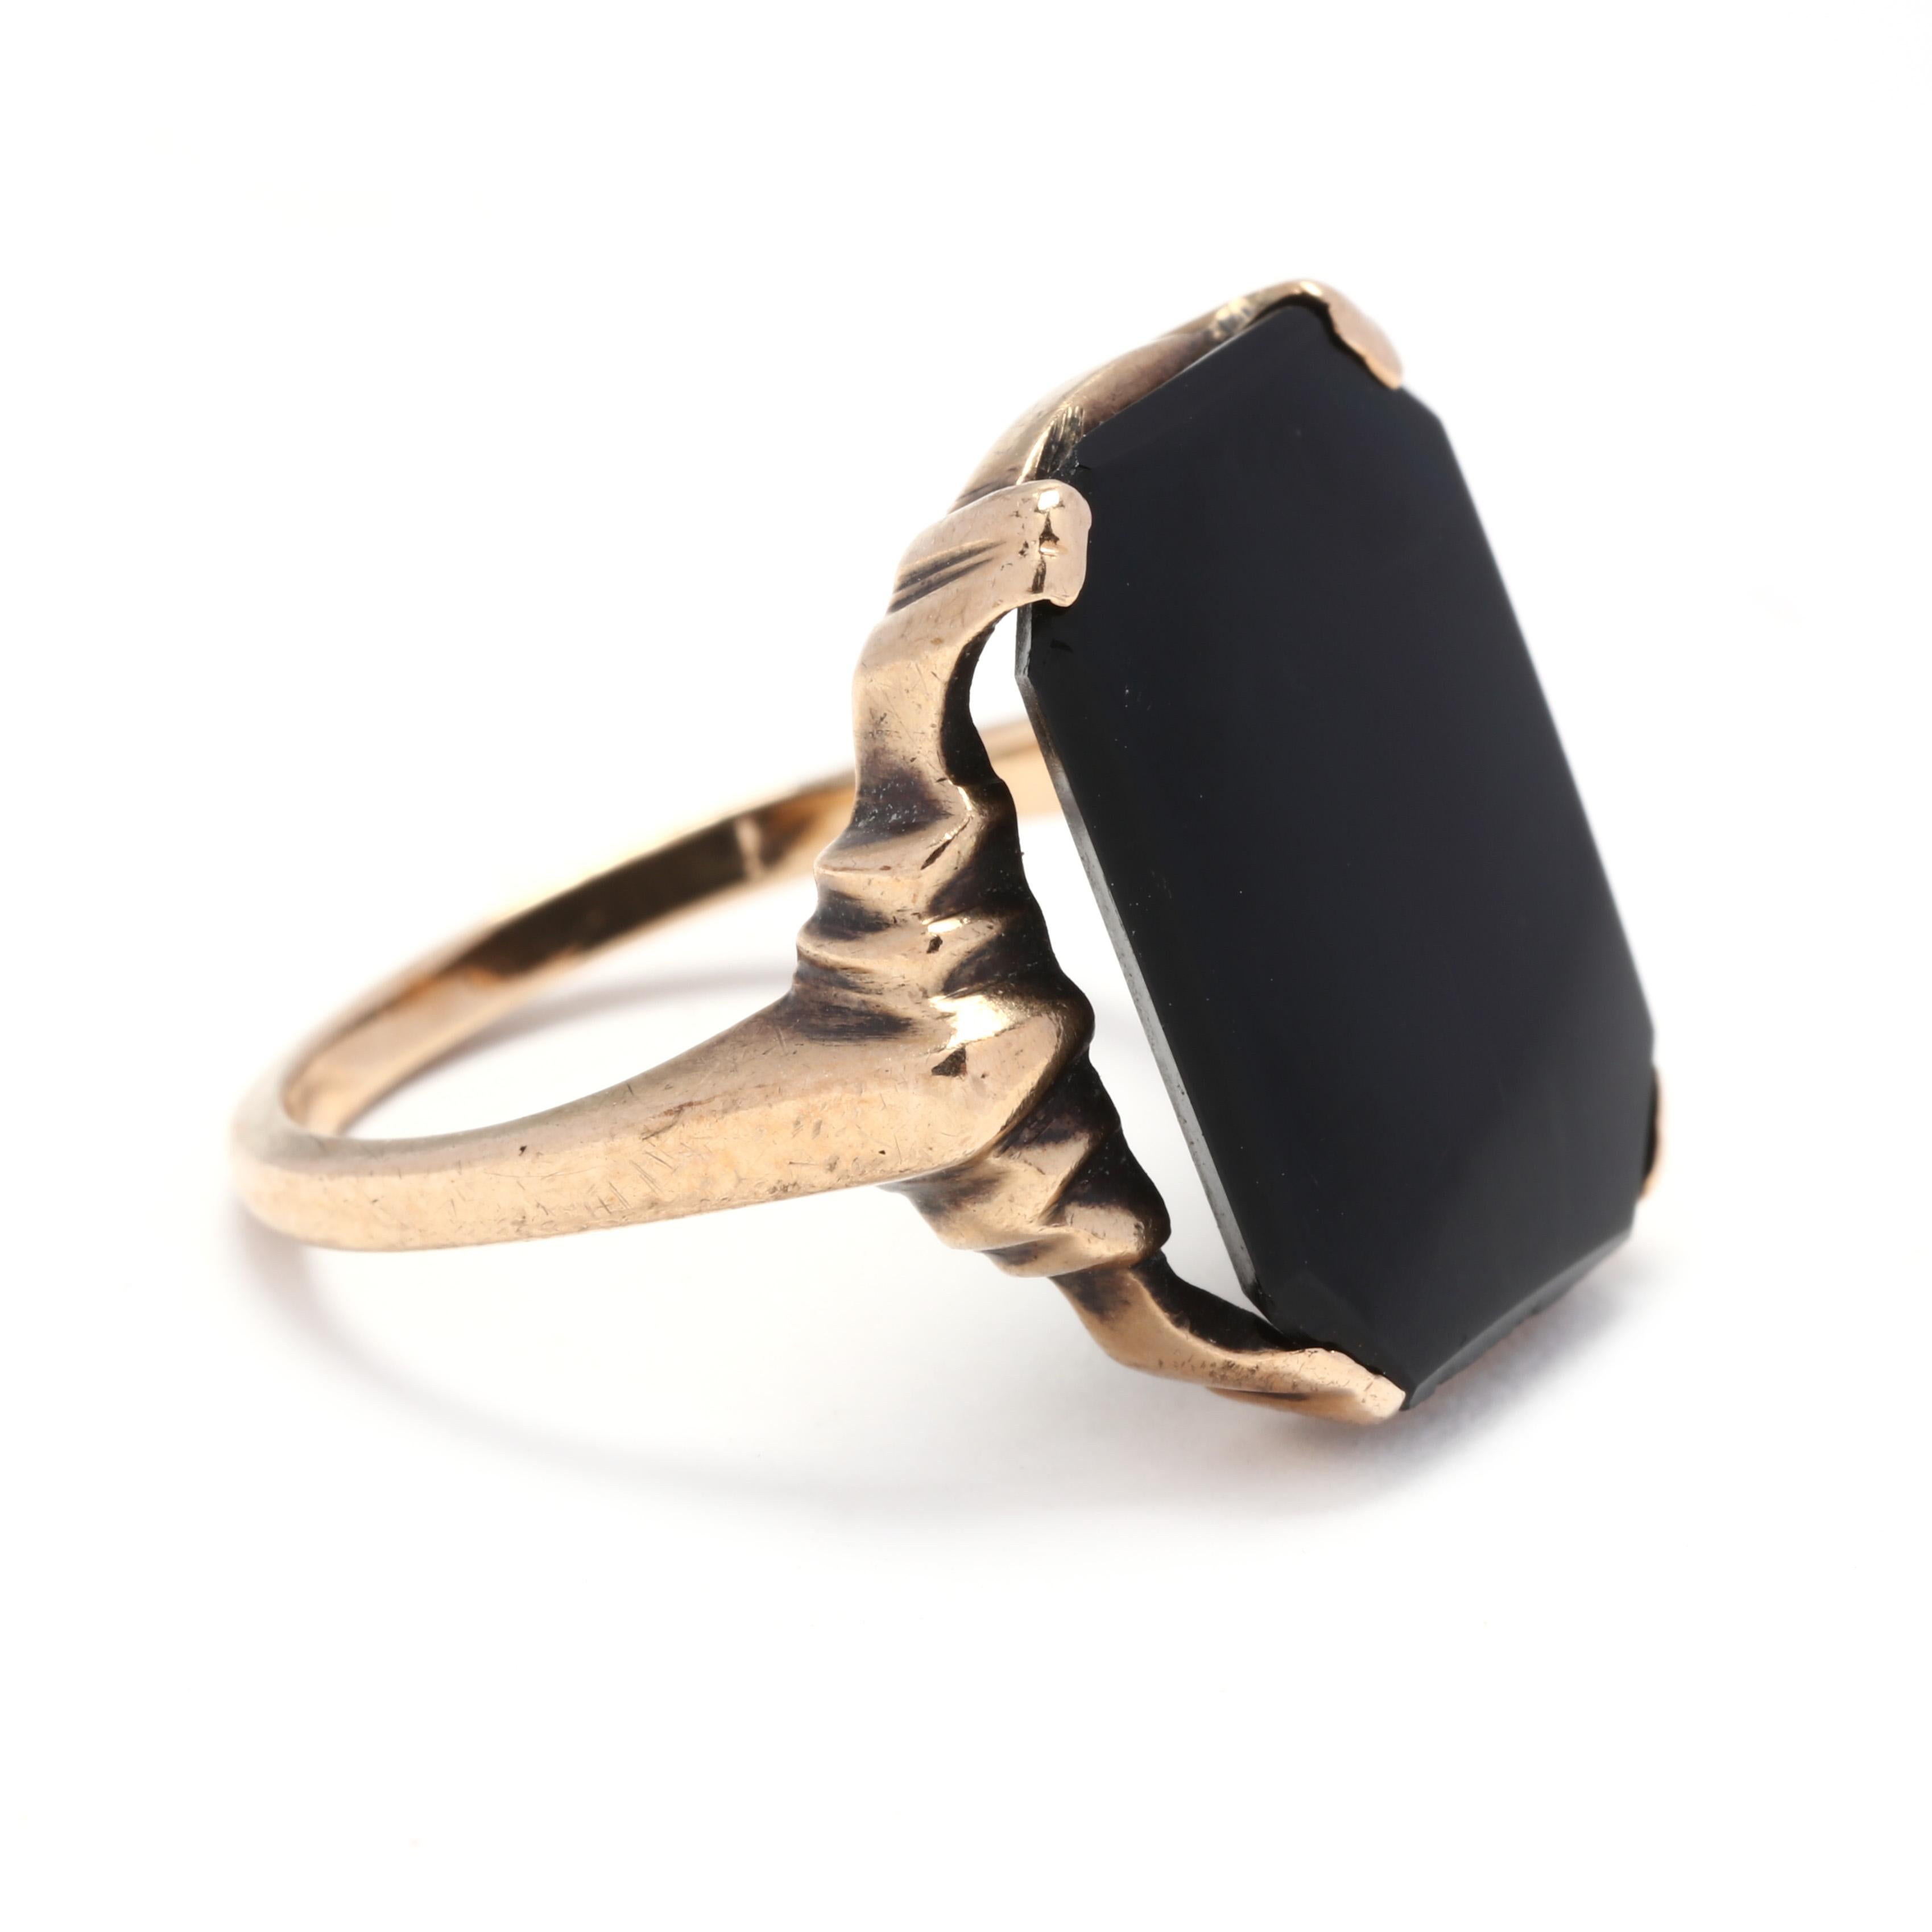 A 1940's 10 karat yellow gold and black onyx signet ring. This ring features a prong set, rectangular black onyx tablet with ridged detailing and a slightly tapered band.

Stones:
- black onyx, 1 stone
- rectangular tablet
- 15.8 x 12 mm

Ring Size